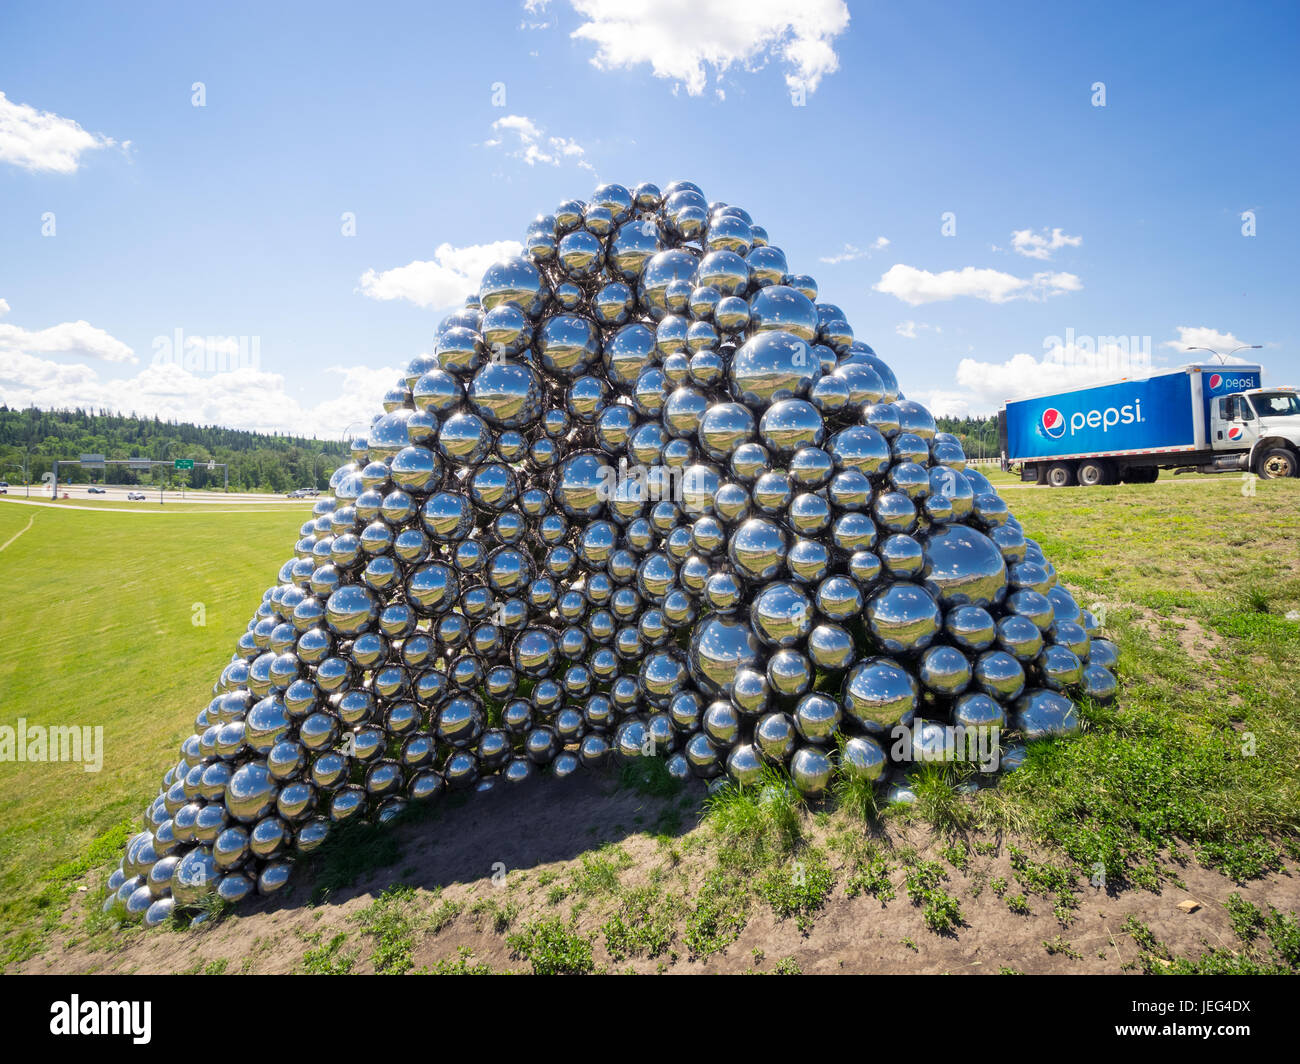 A view of the public sculpture of nearly 1,000 stainless steel spheres known as Talus Dome in Edmonton, Alberta, Canada. Stock Photo